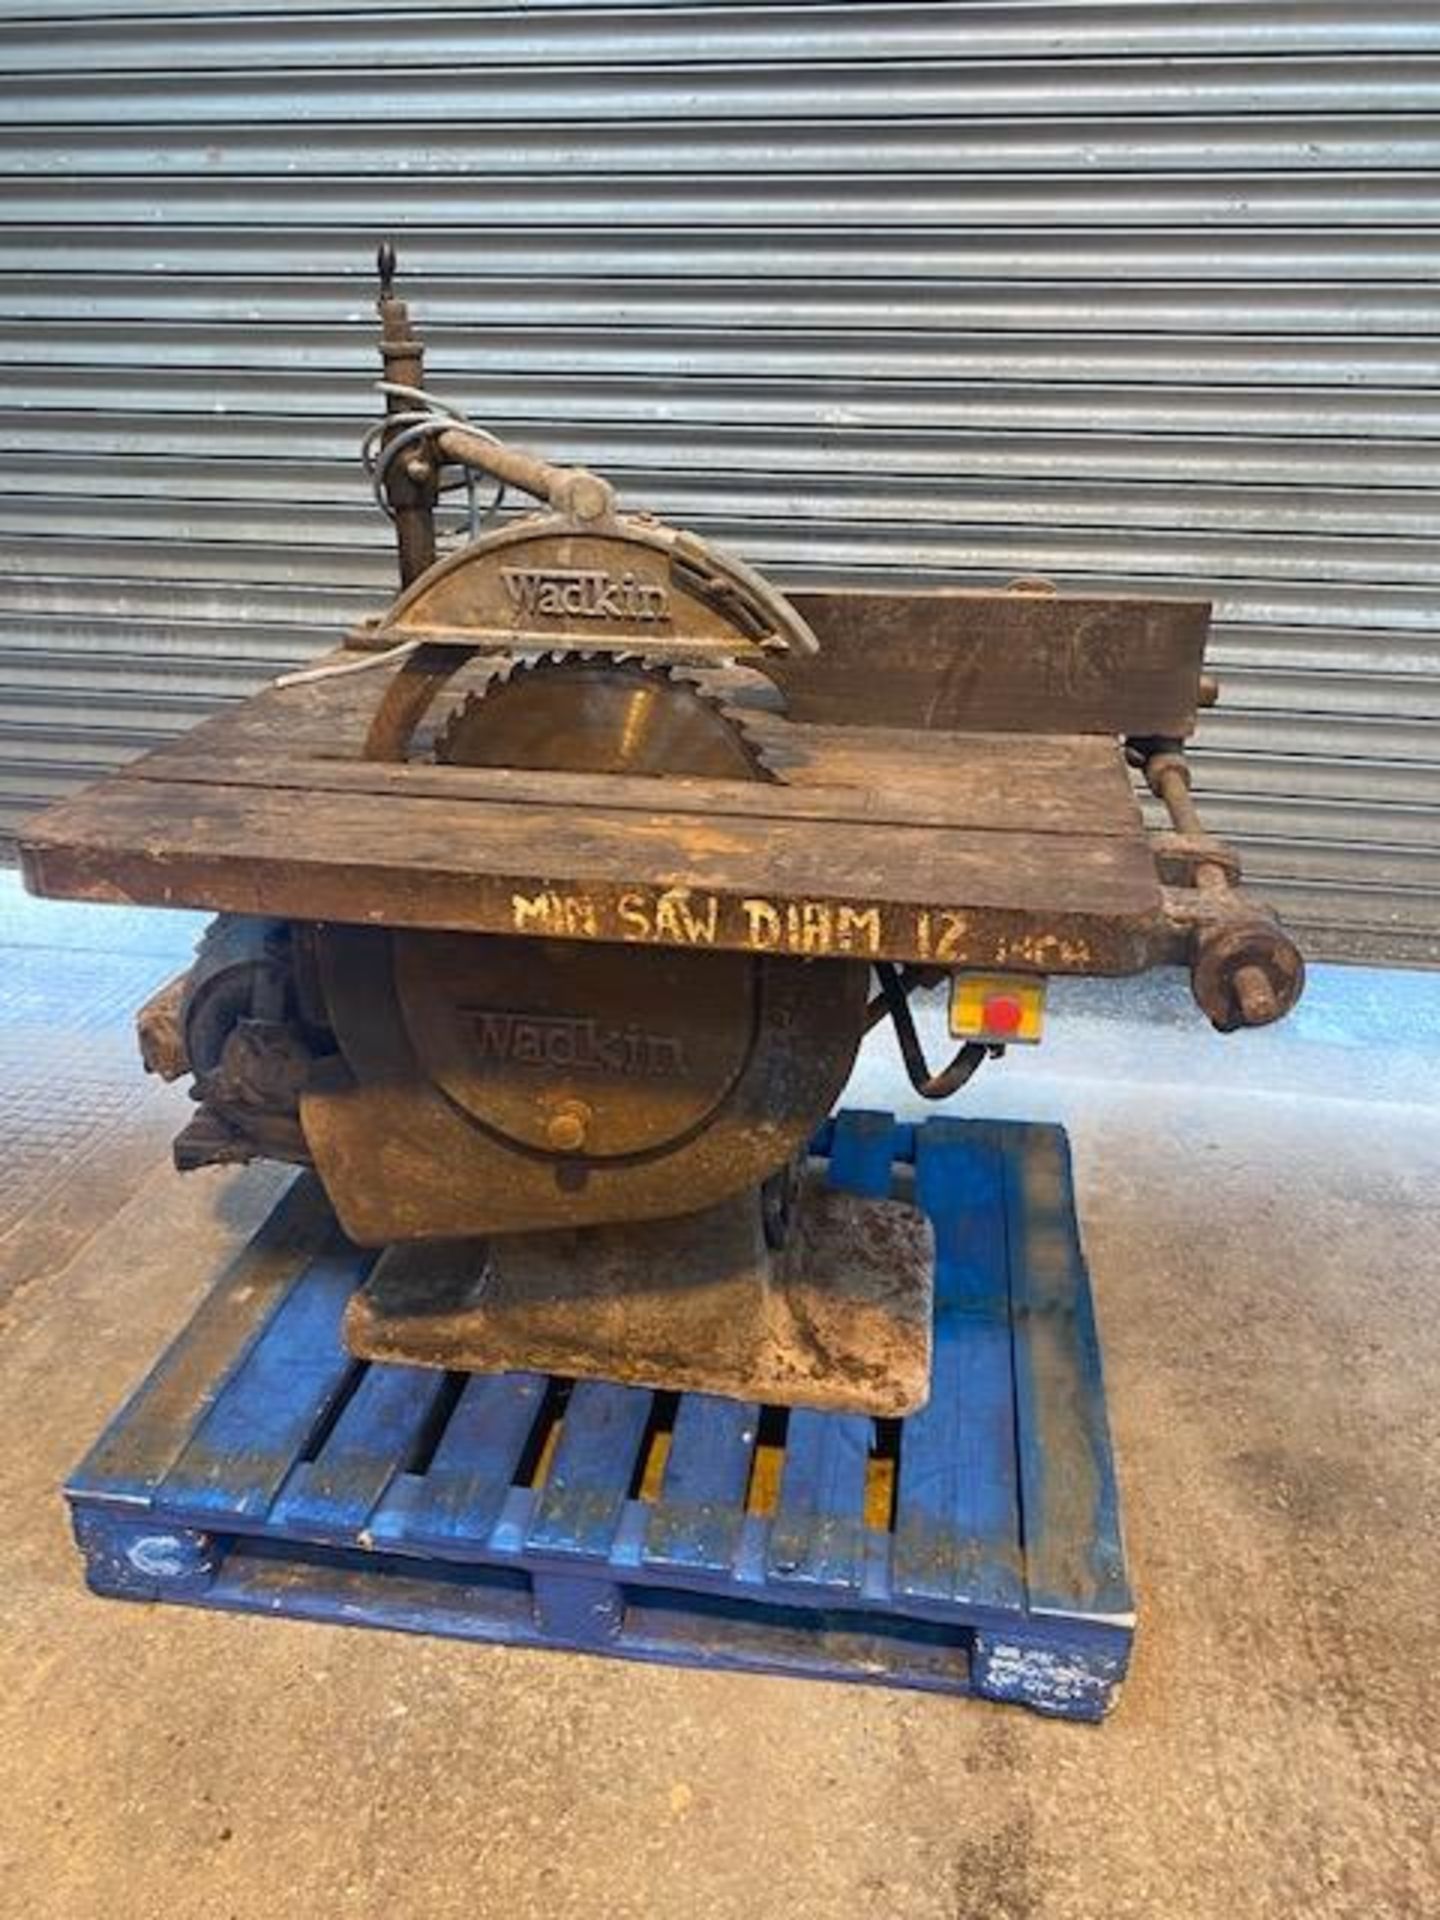 Wadkin SO 18in. Rip Saw, serial no. 225, with rise and fall to the bed, 16in. blade fitted, with a